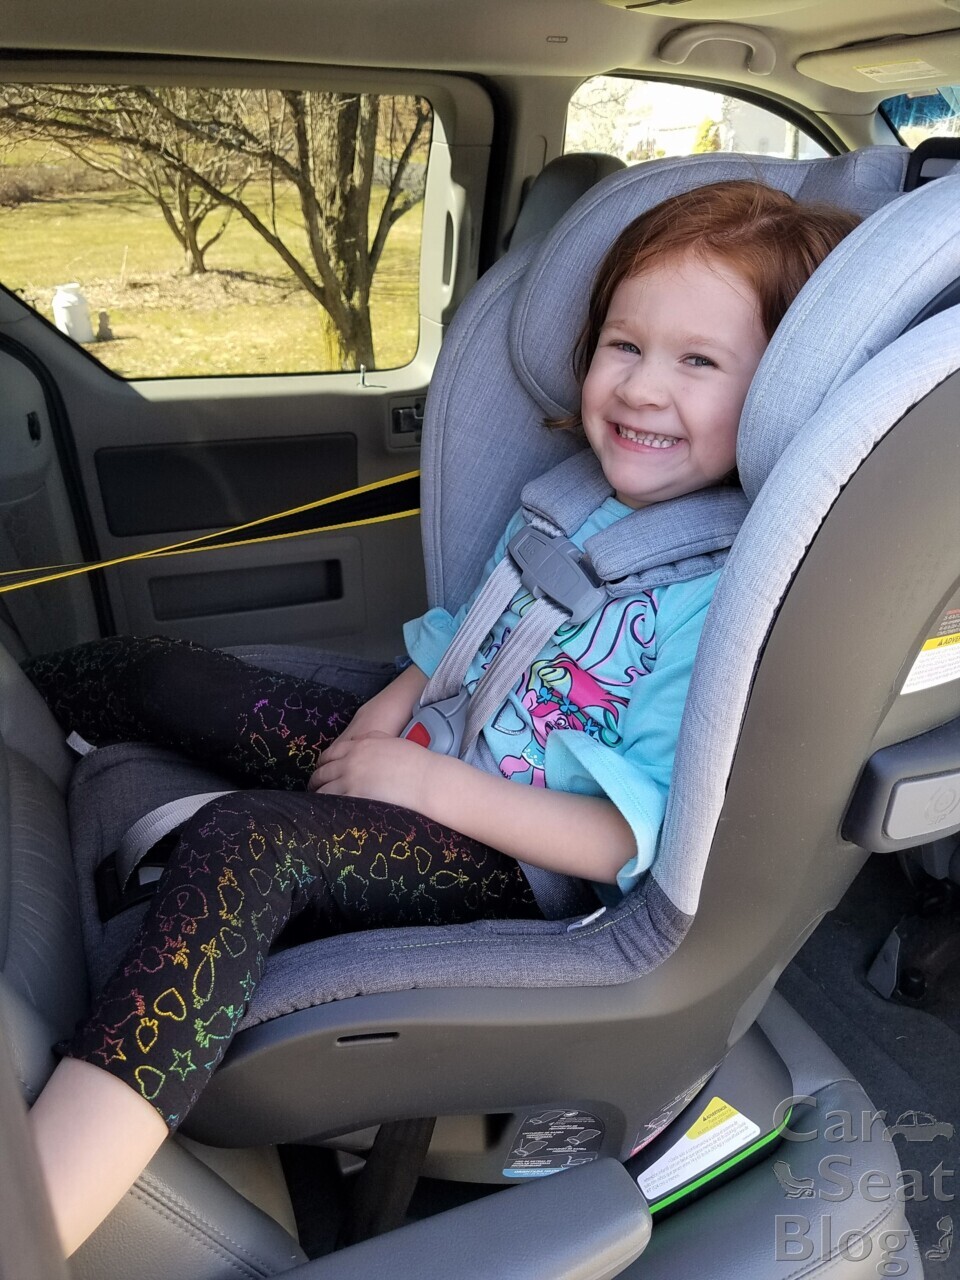 Myth: Legs Bent or Feet Touching the Backseat When Rear-Facing is Dangerous  – CarseatBlog